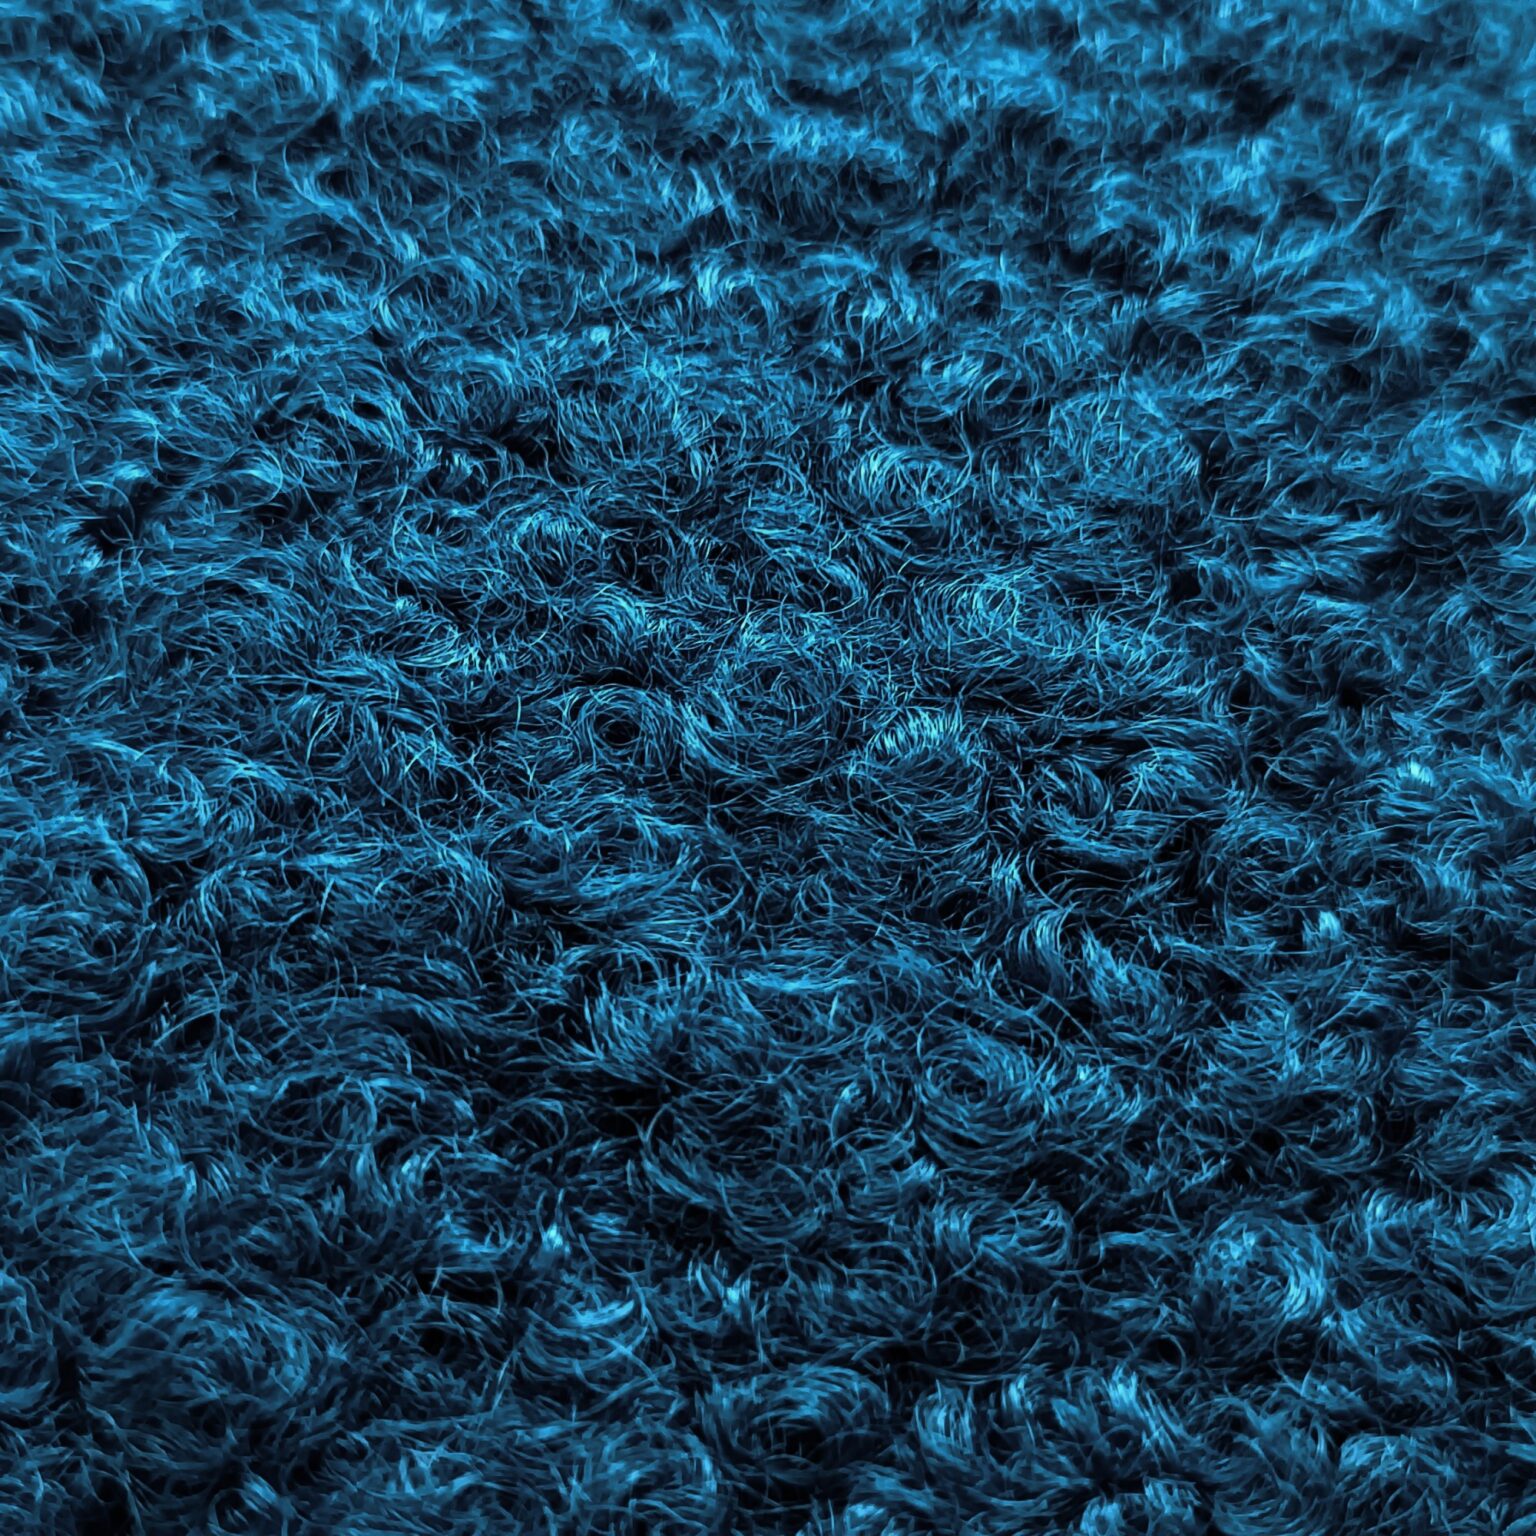 Polyester Boucle Fabric - Teal - 150cm Wide